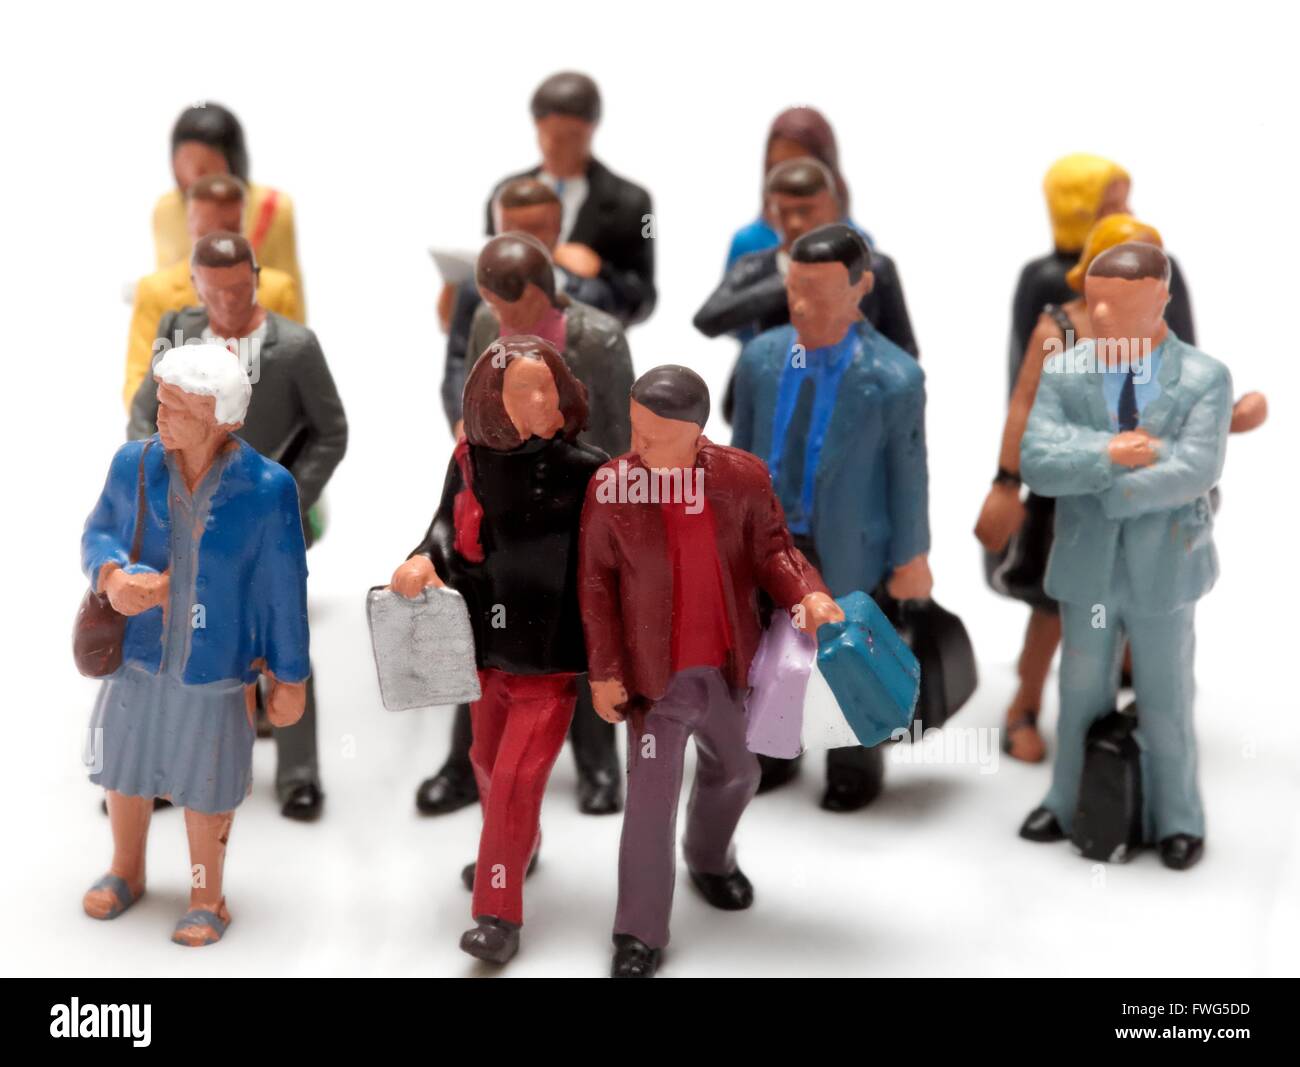 1/32 Scale Models Figurine People Figurines Ornament Tiny People Painted  Figures Standing Tiny People for Miniature Scene Sand Table Diorama style C  